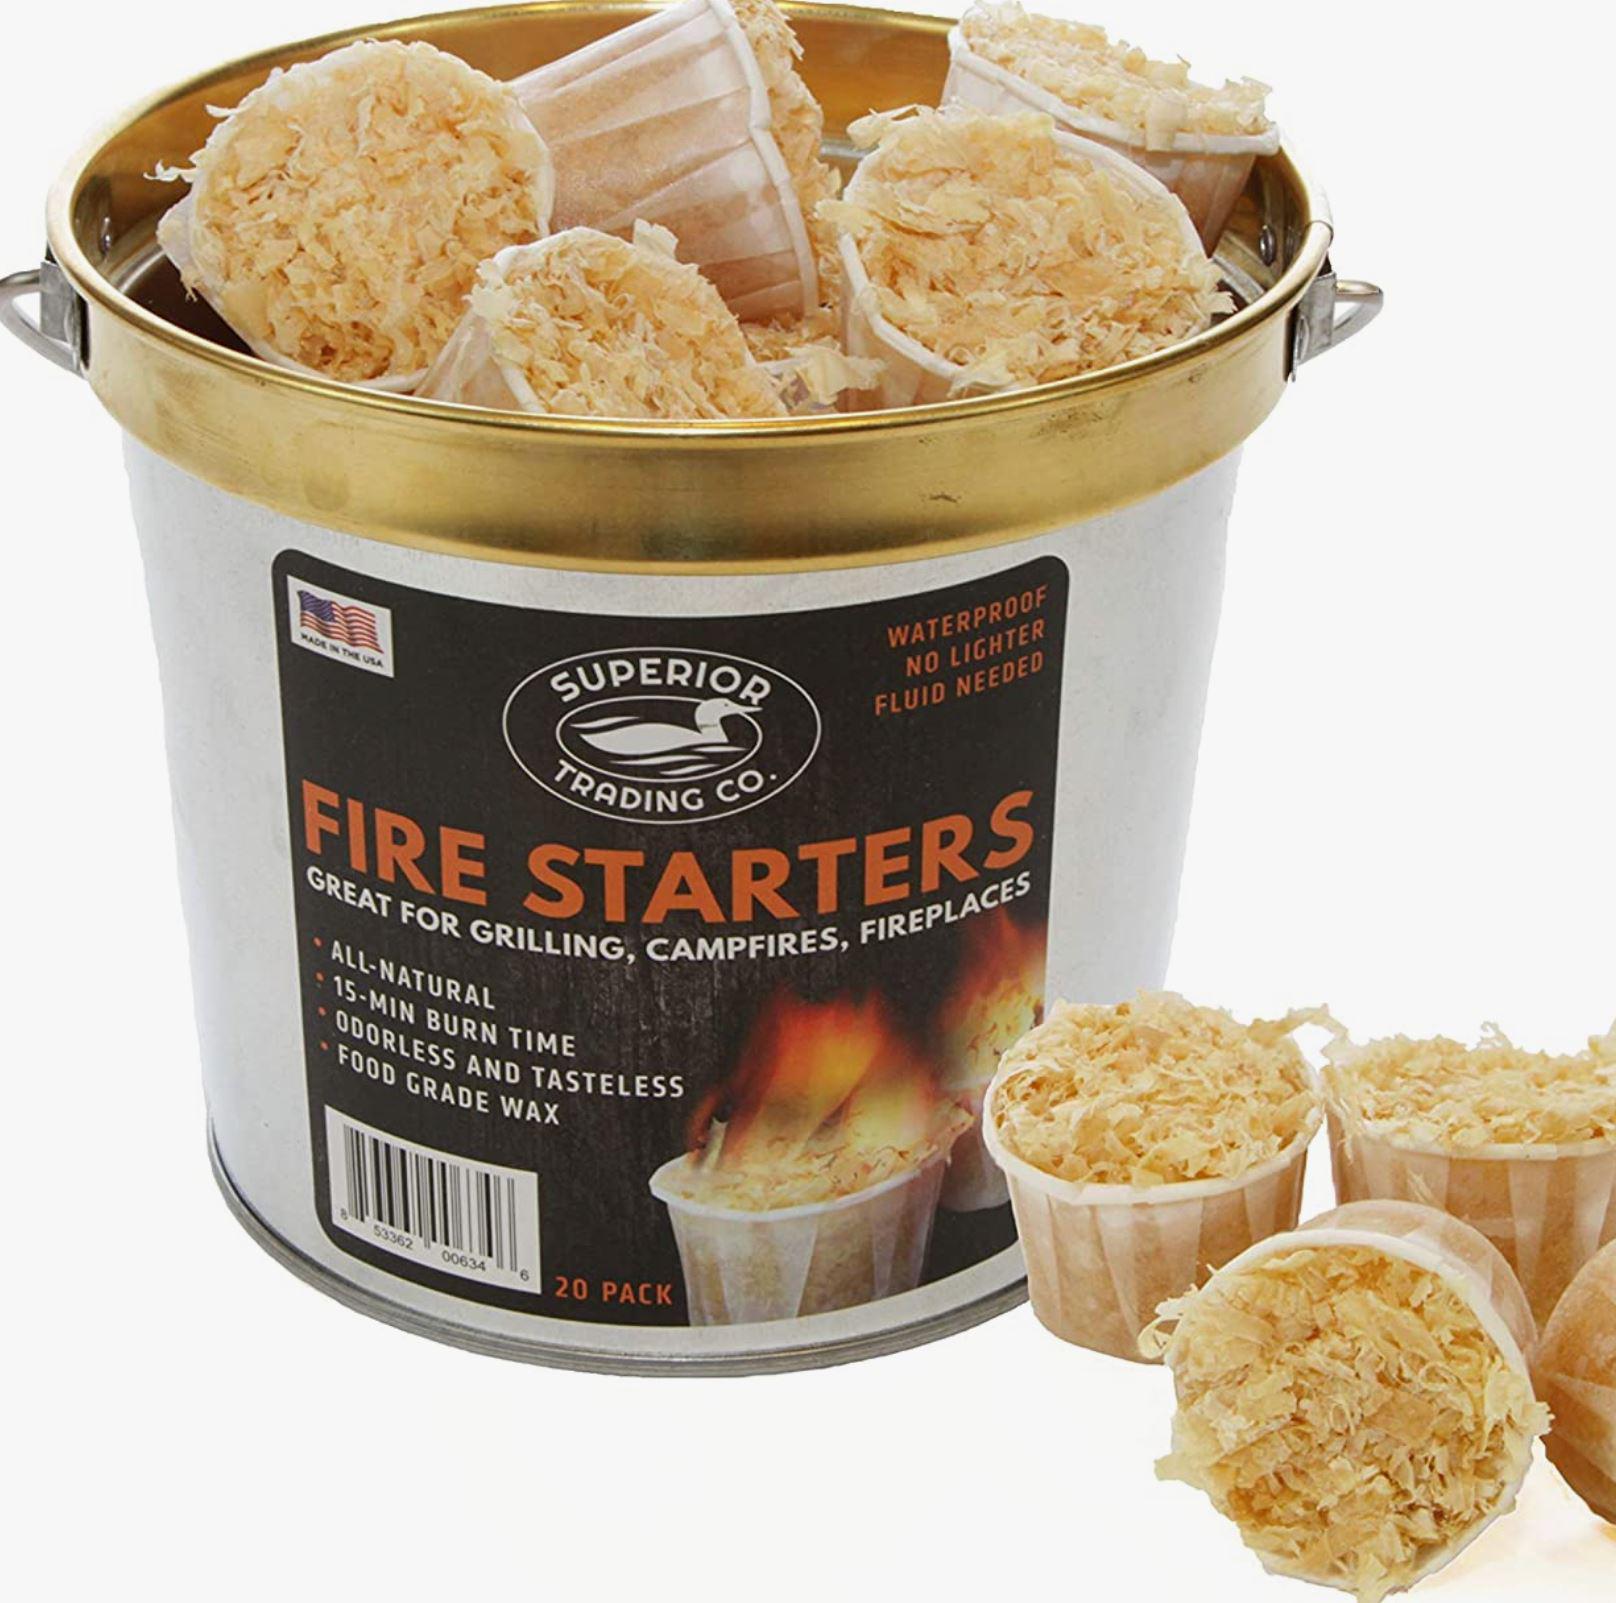 All Natural Fire Starters for BBQ, Charcoal, Grill